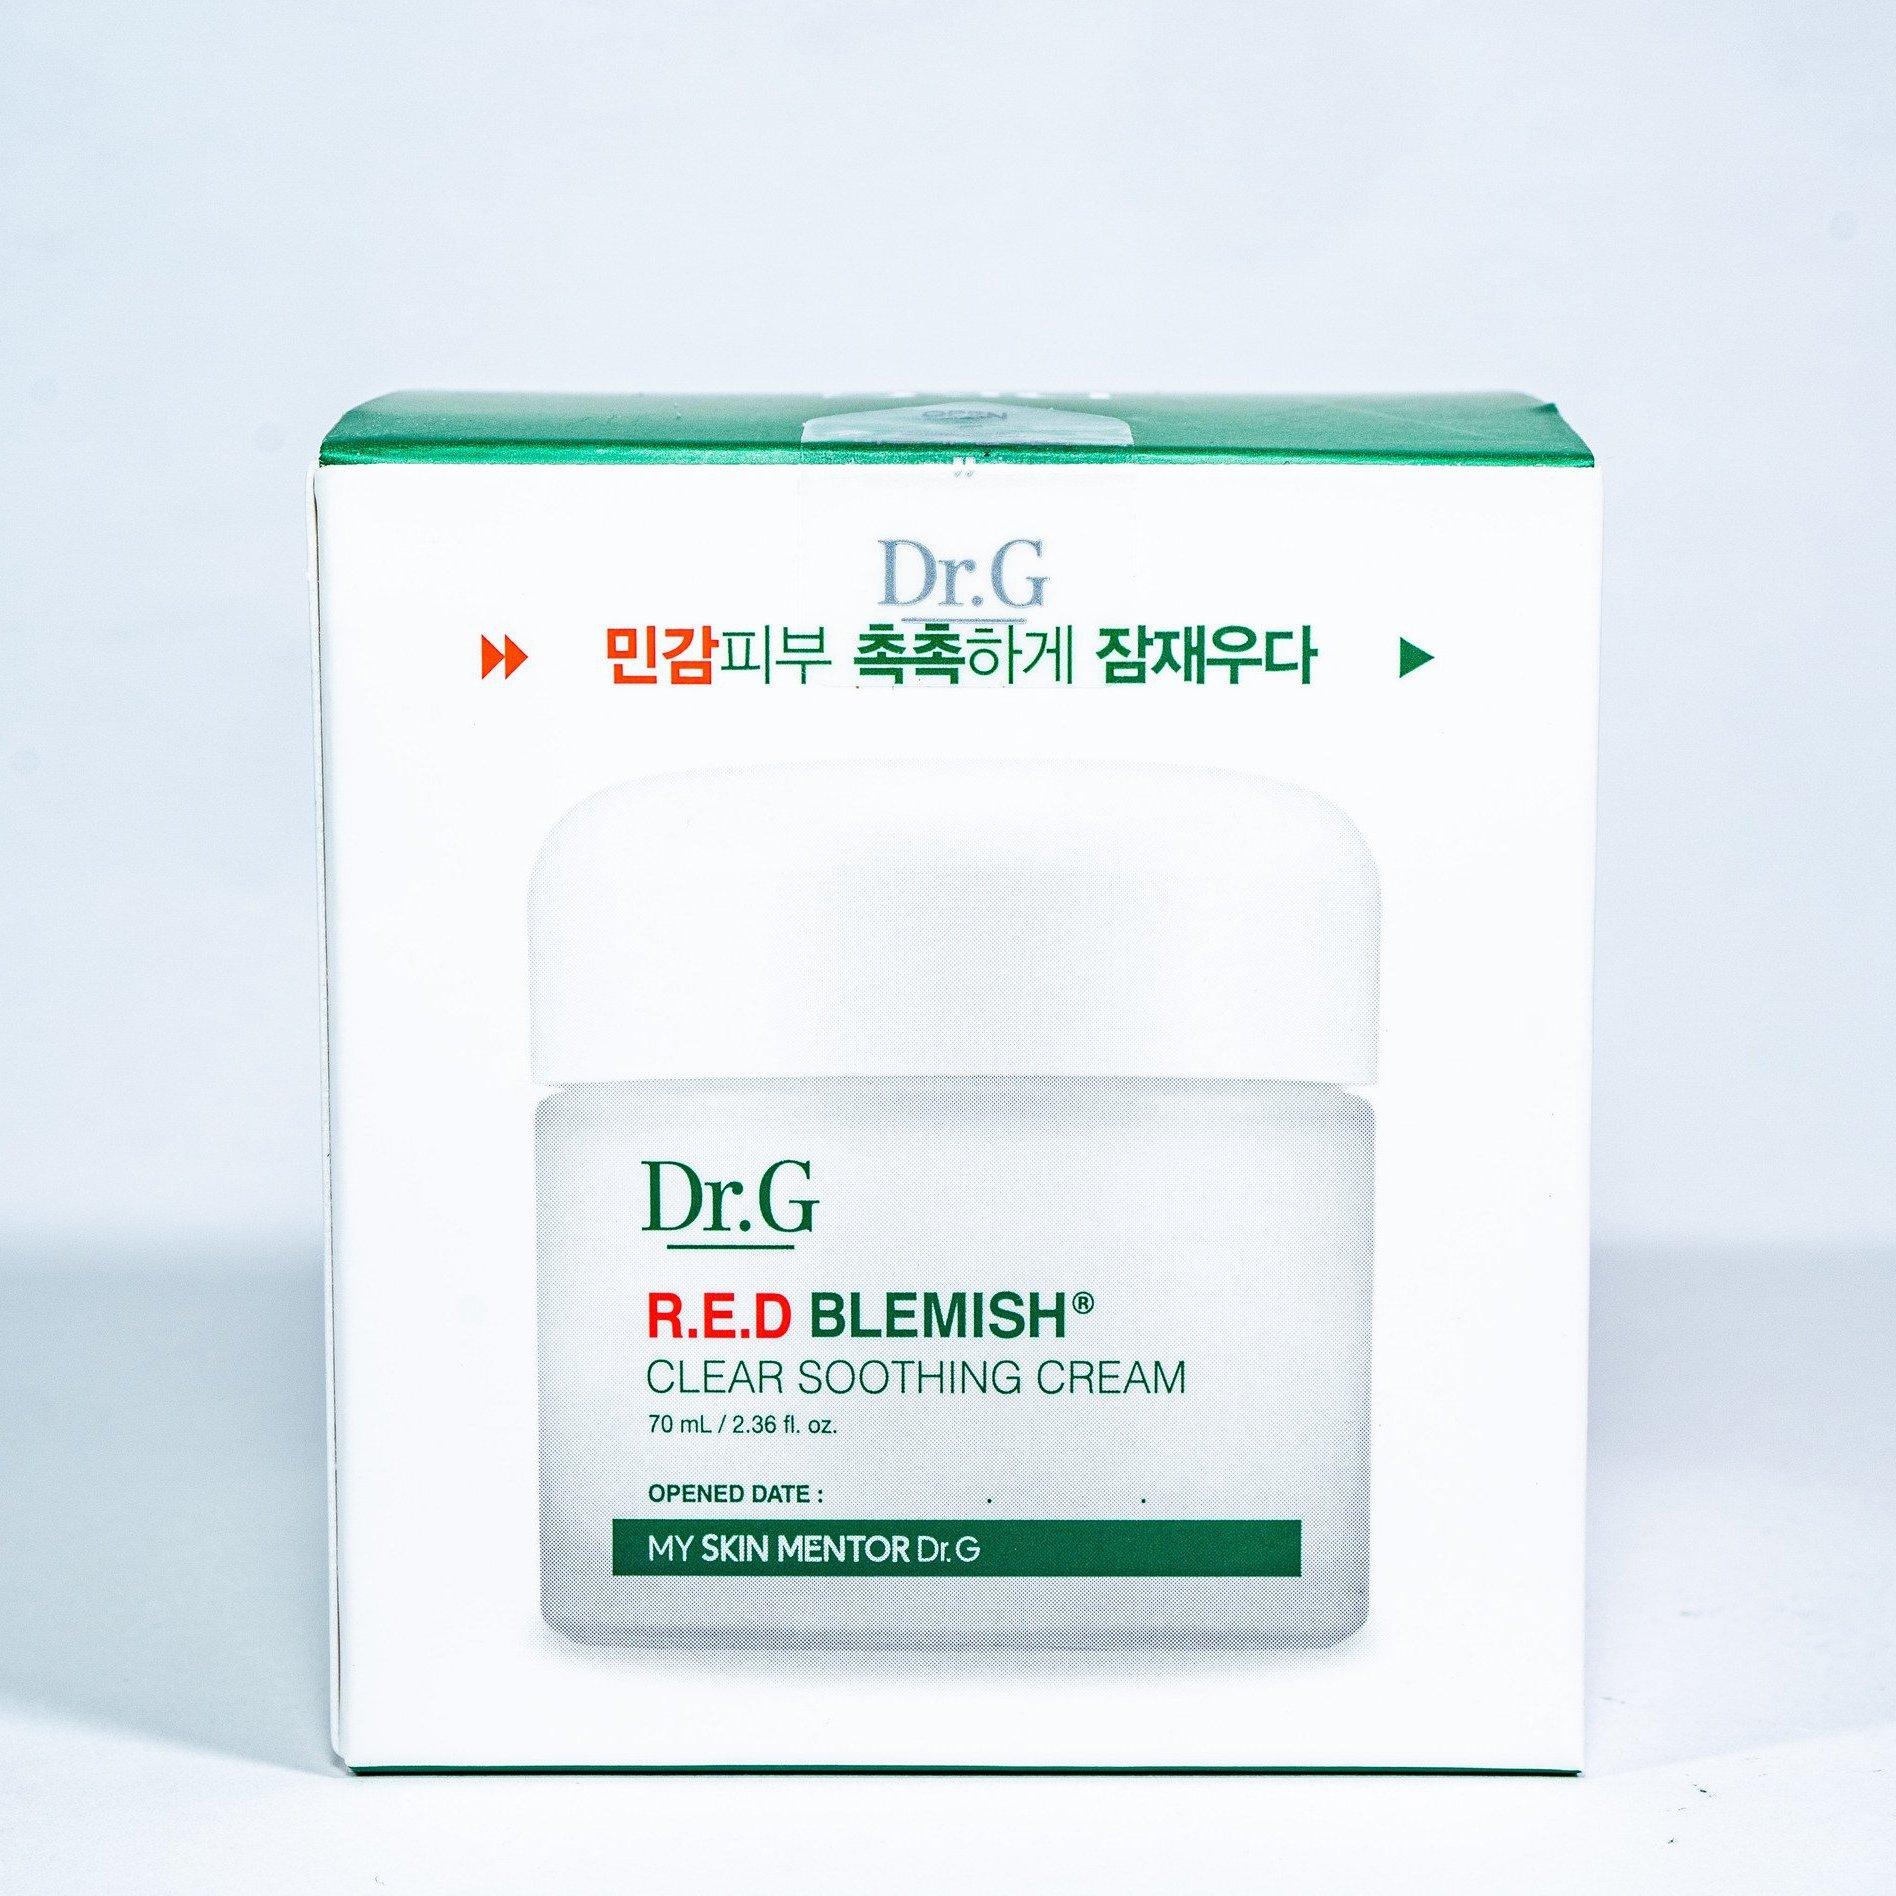 DR.G Red Blemish Clear Soothing Cream 70ml